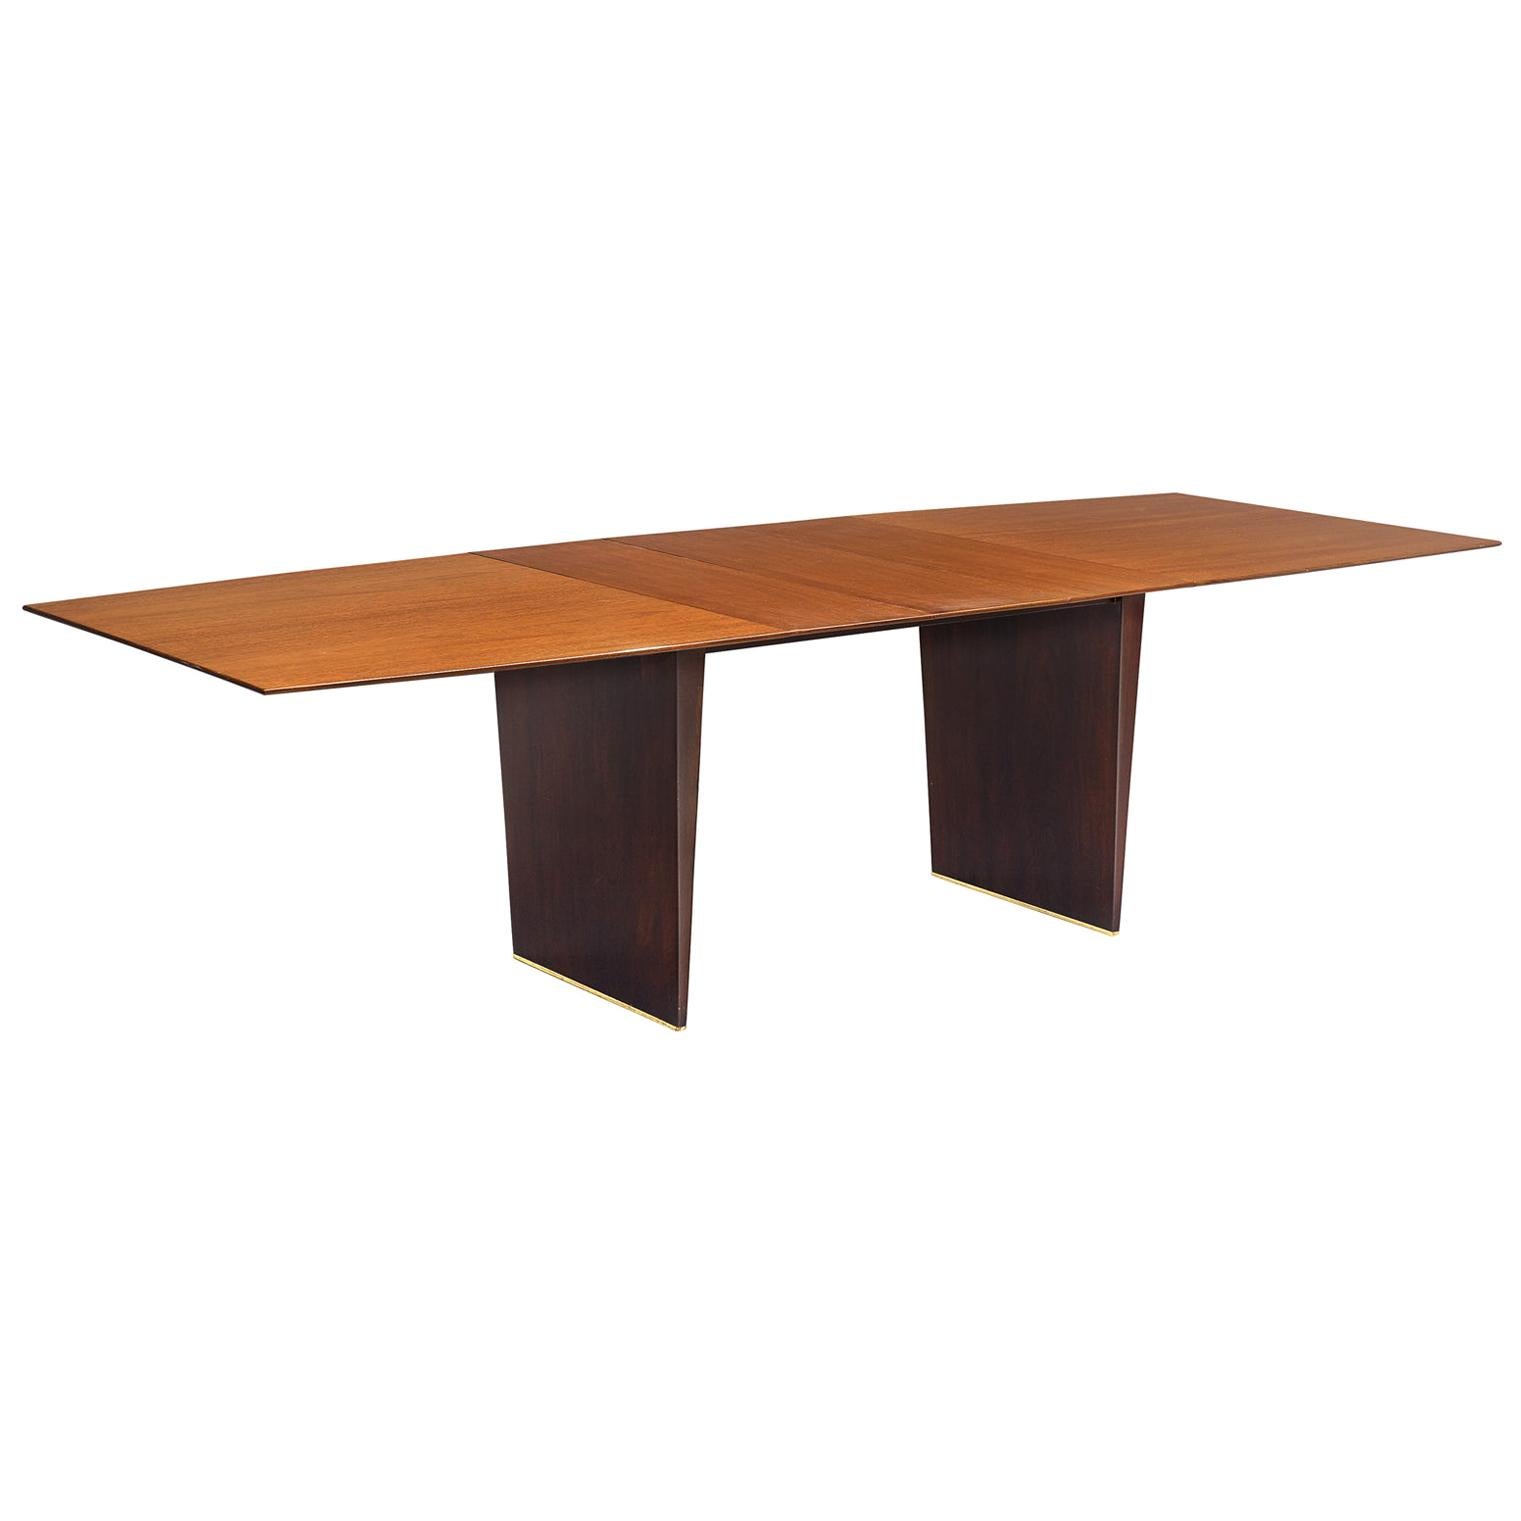 Edward Wormley Extendable Dining Table in Tawi with Tapered Legs